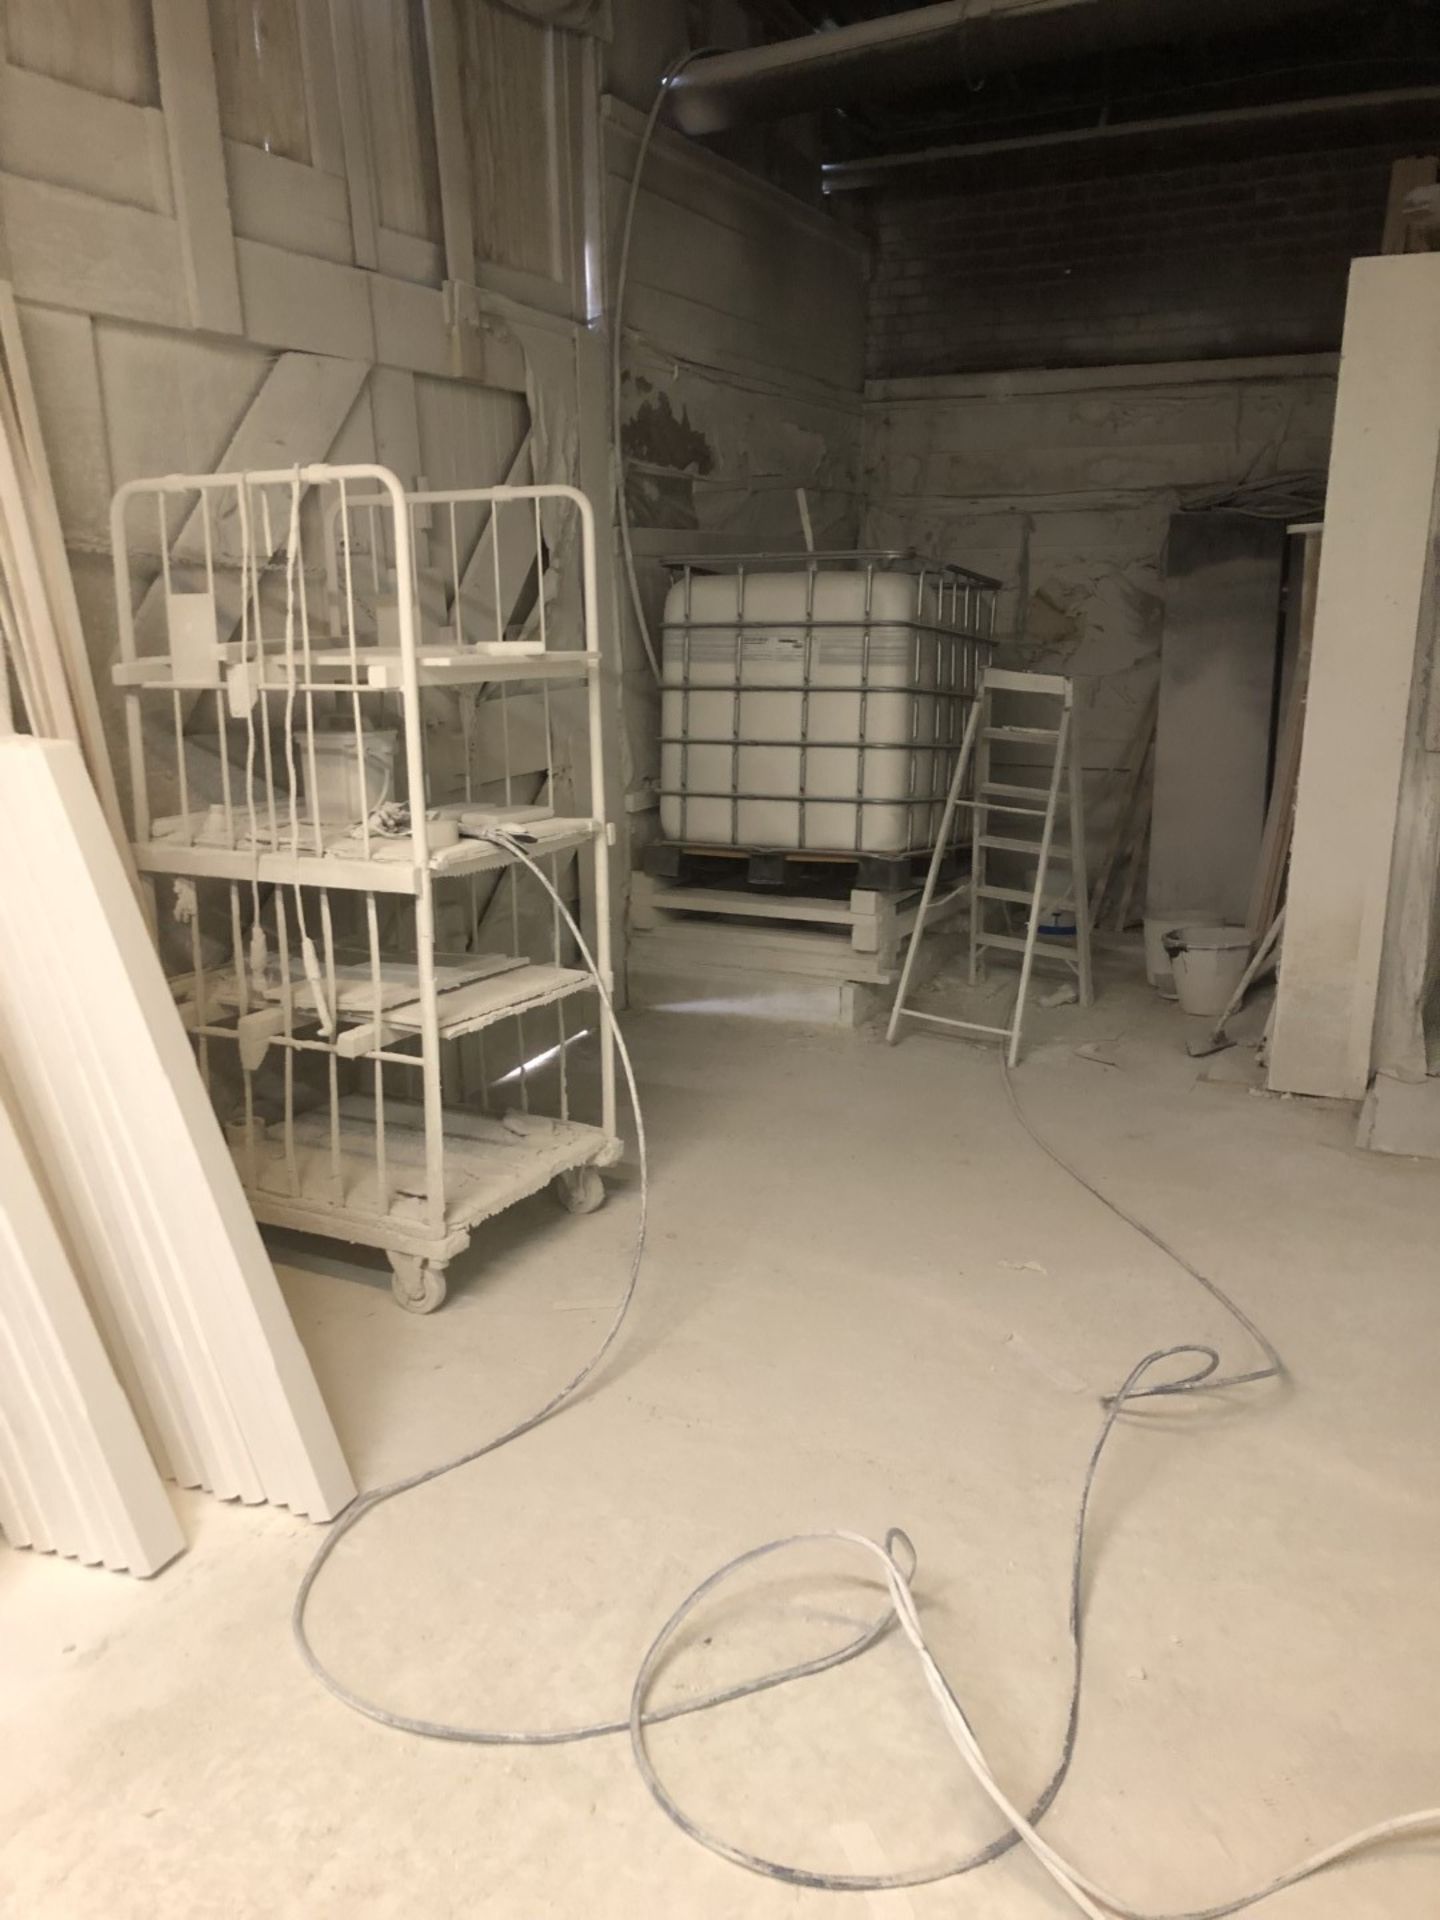 Contents of Spray Room, including primer, stock and heater. - Image 2 of 2